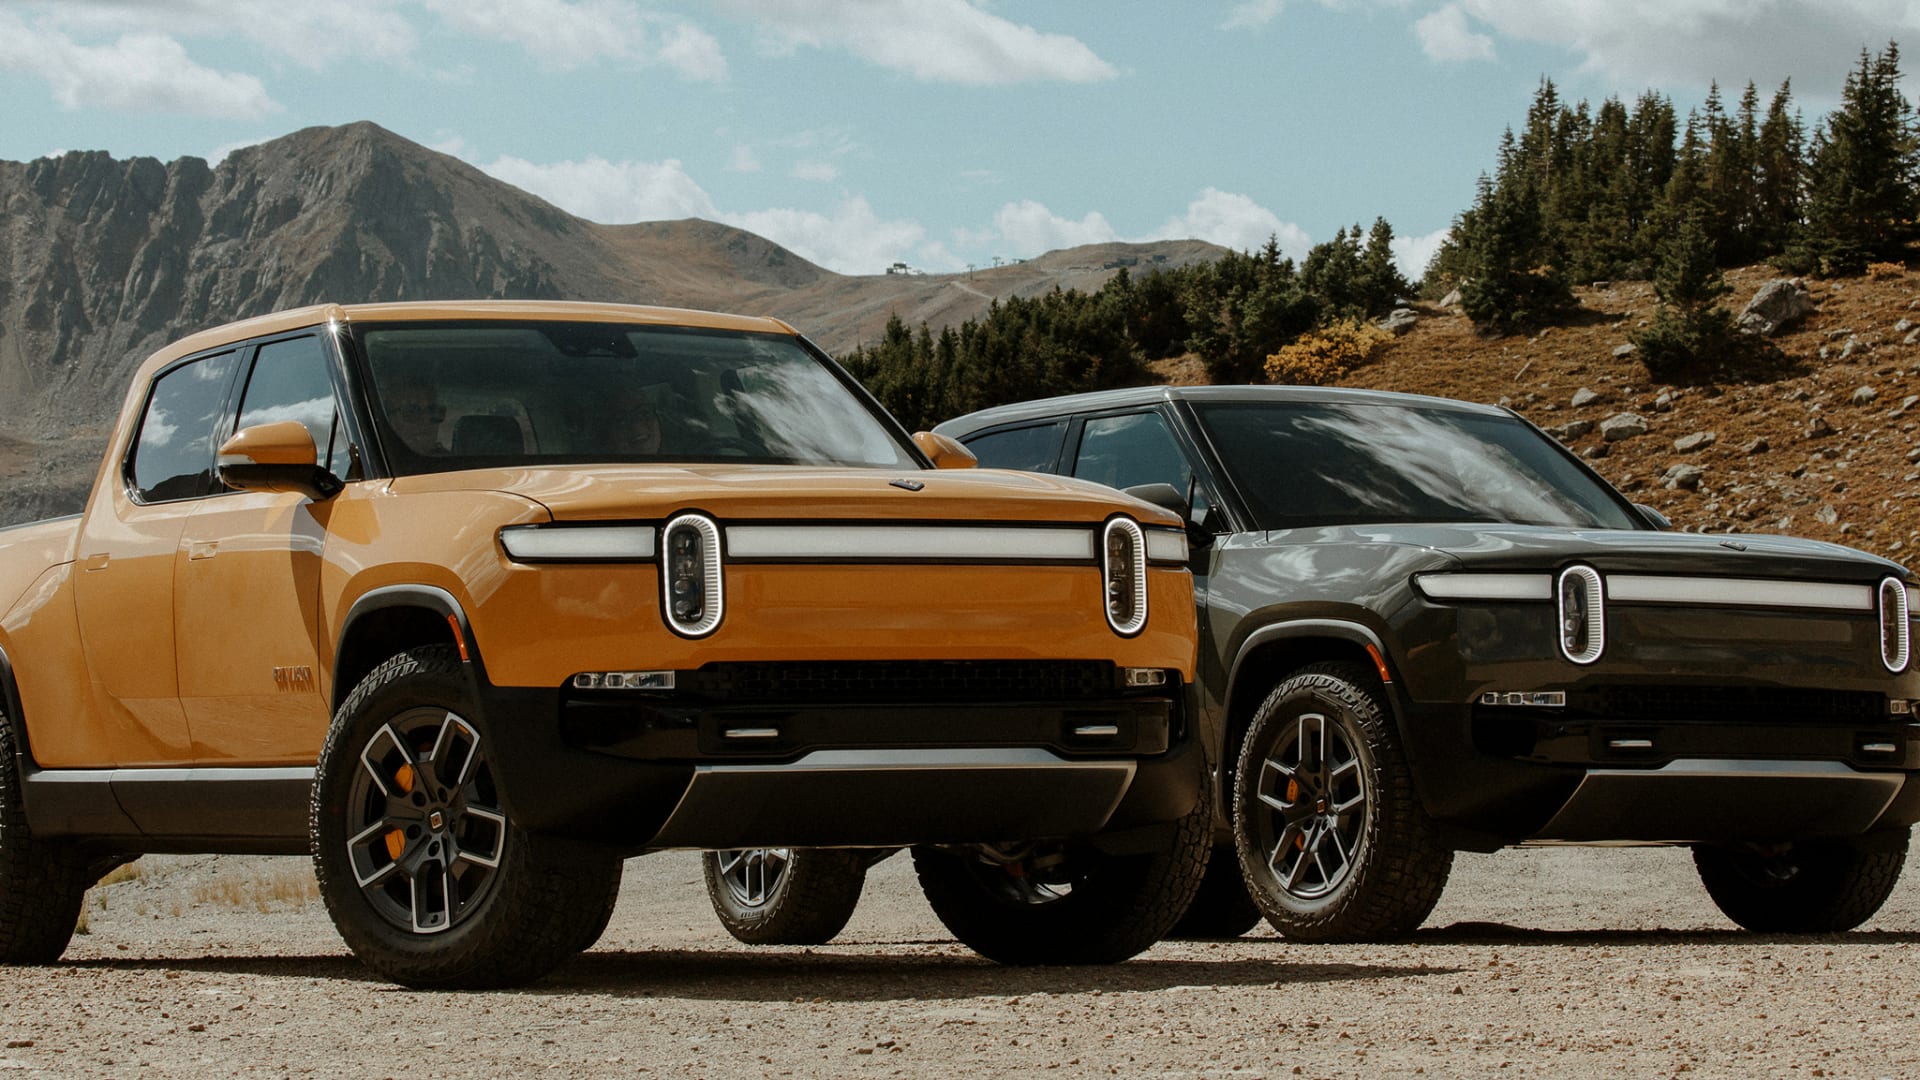 The 2022 Rivian R1T.